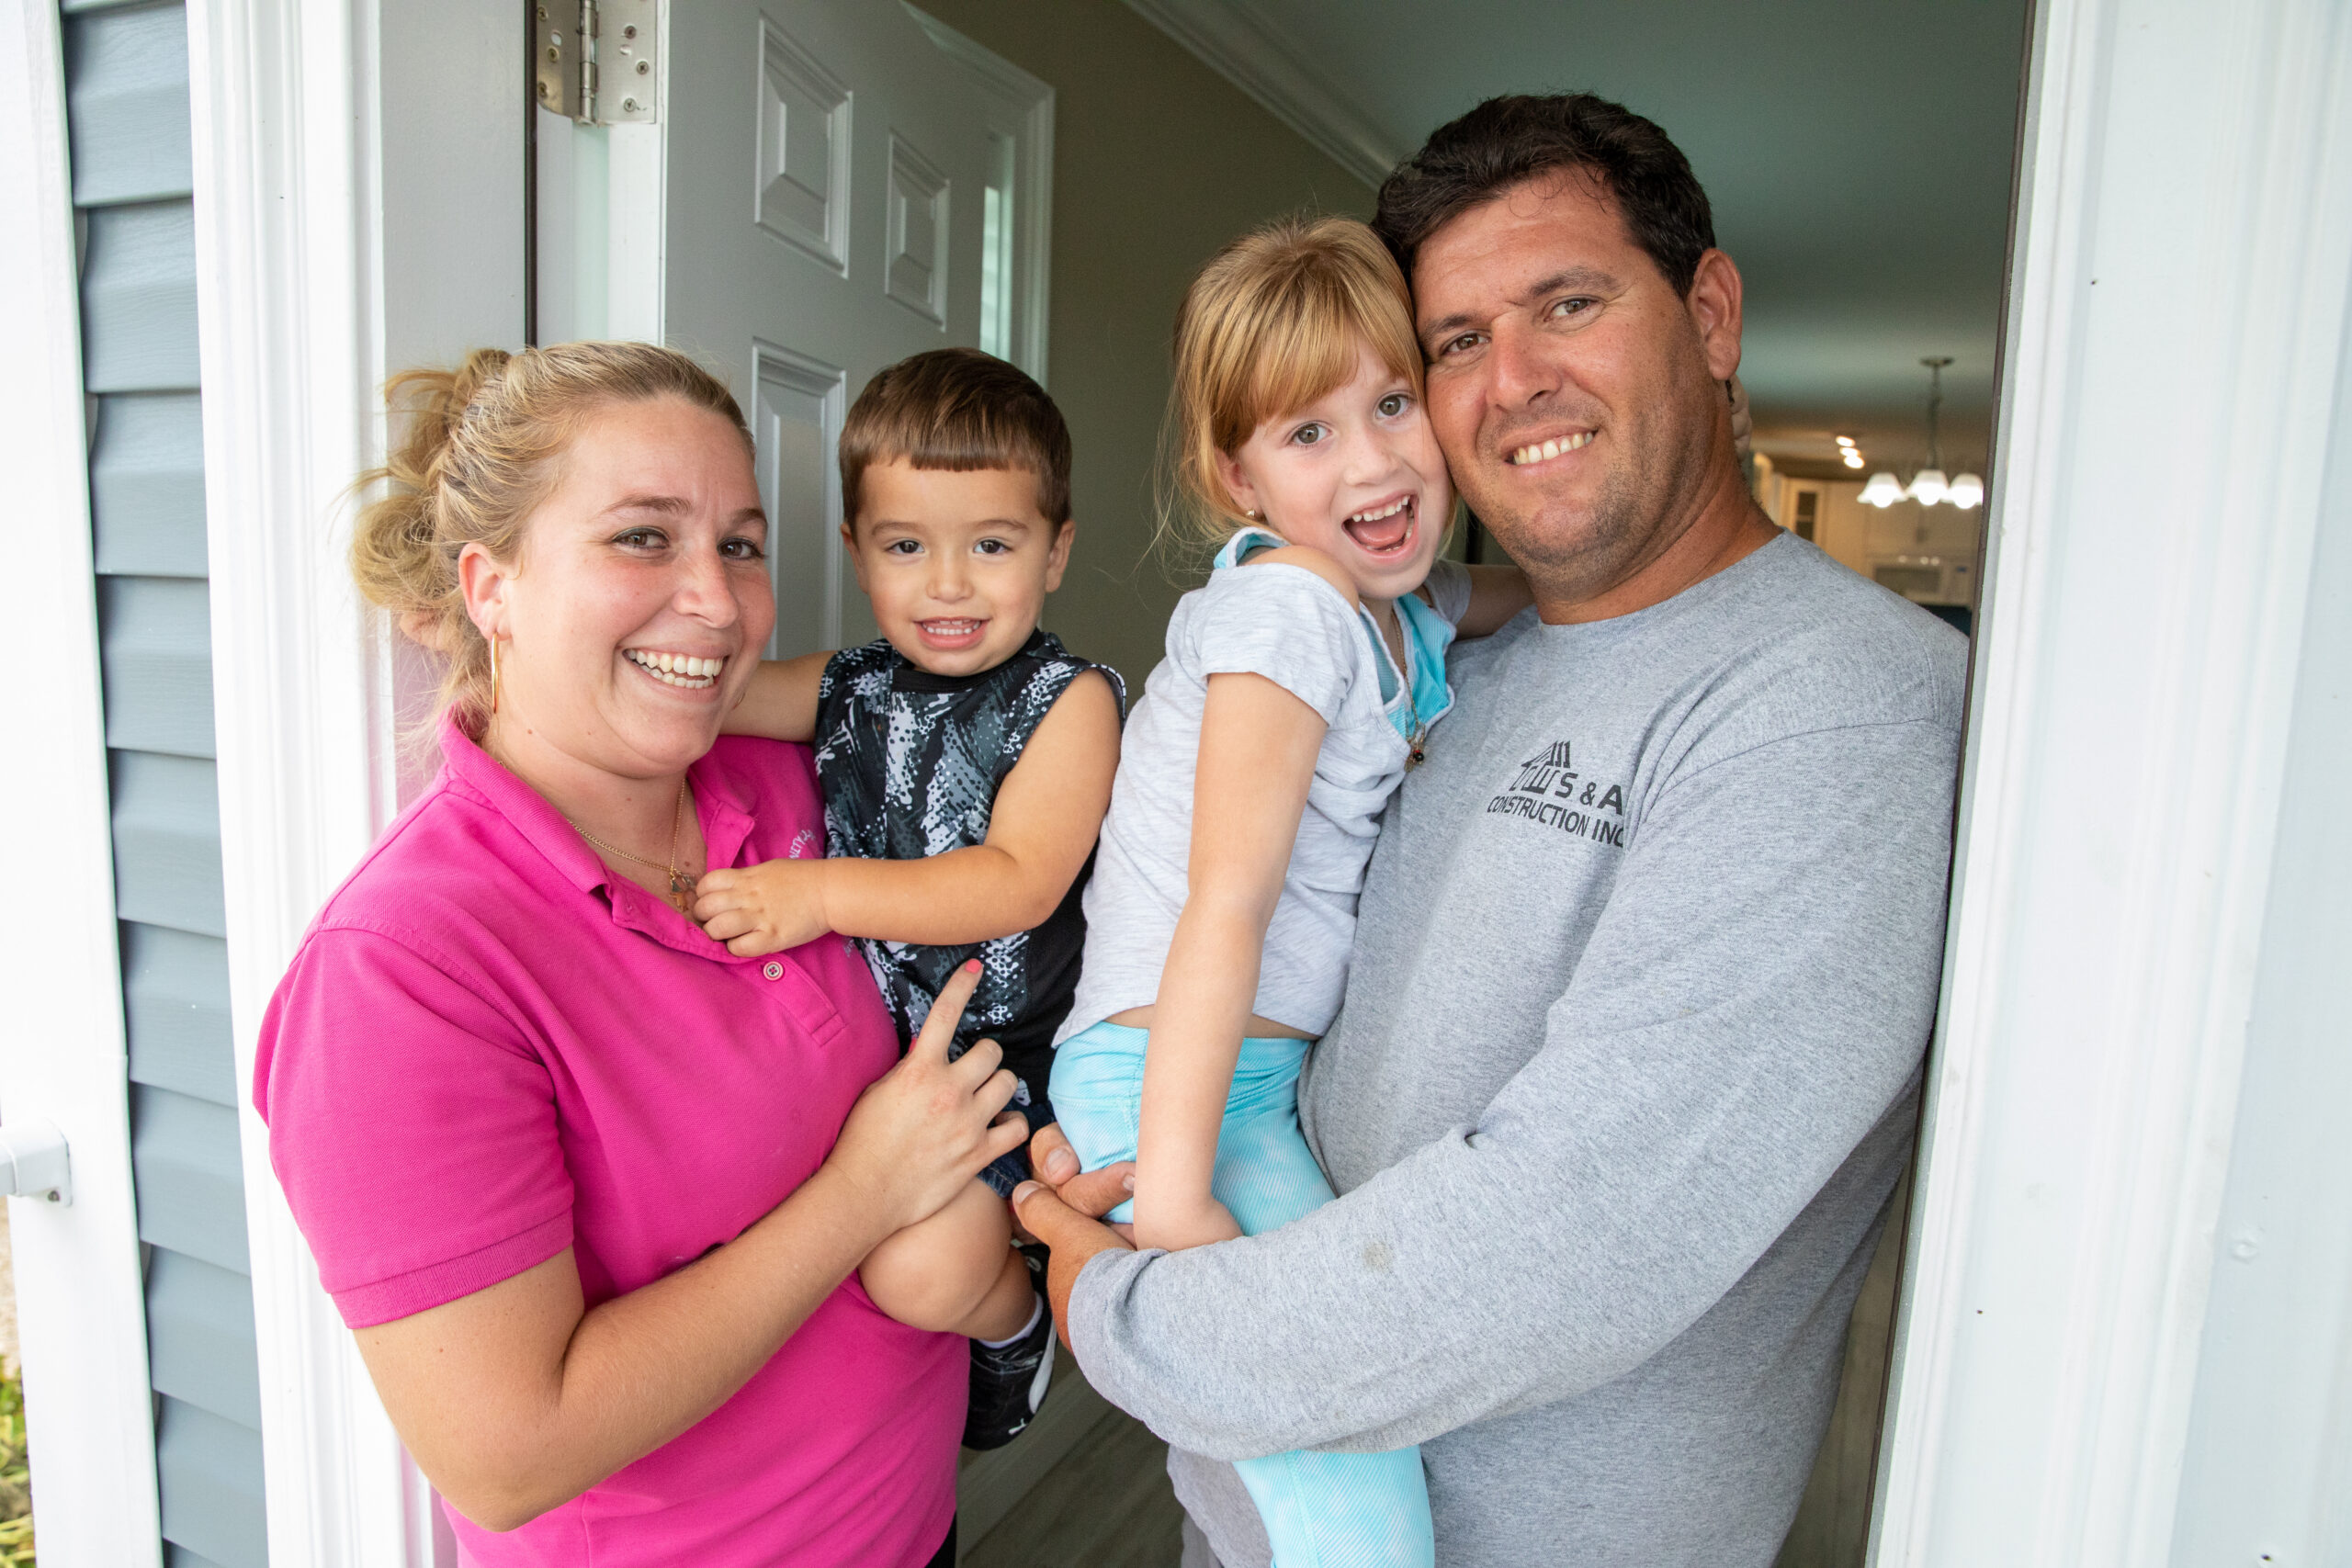 MARATHON, FL, USA (7/09/19)-Didier Perez and Anny Amador and their two children, 5-year-old Samantha and 1-year-old Dylan, moved into their Habitat home in Marathon, Florida, in March 2019. After the rental where they had been living flooded and was heavily damaged during Hurricane Irma in September 2017, the family bounced around from one place to another. Didier, who works construction, is a long-time volunteer with Habitat for Humanity of the Middle Keys and is grateful to have his own home. “This is the maximum that I can achieve,” he says. “I know that we are not going to be homeless again.” © Habitat for Humanity International/Jason Asteros